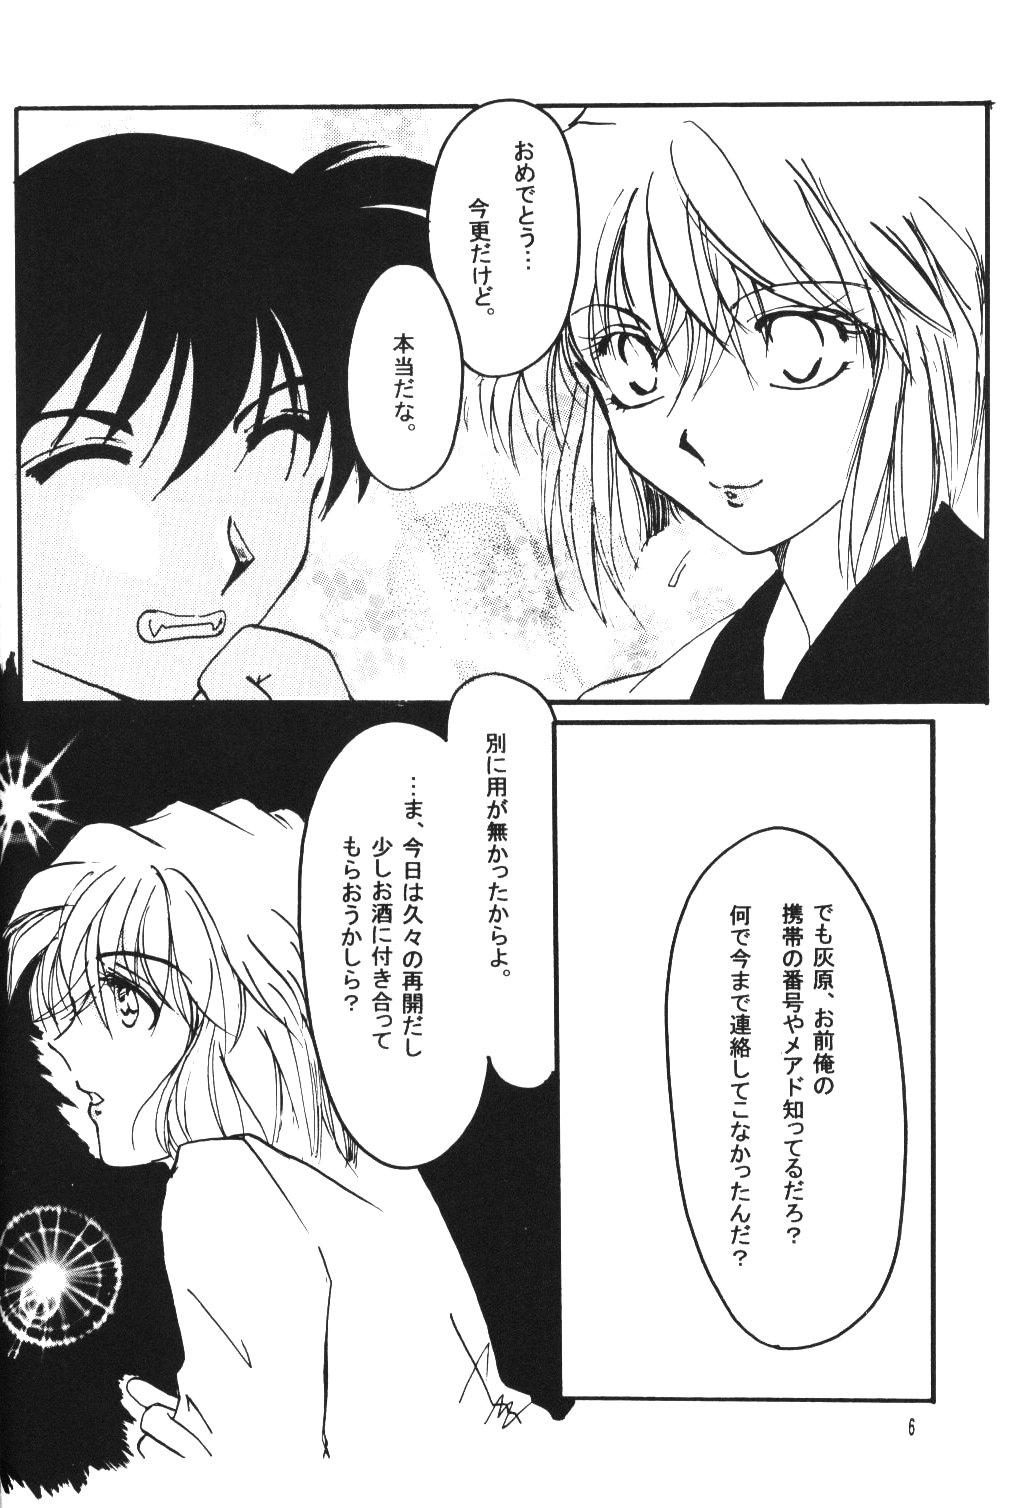 Old And Young Over Drive - Detective conan Gay Blondhair - Page 5